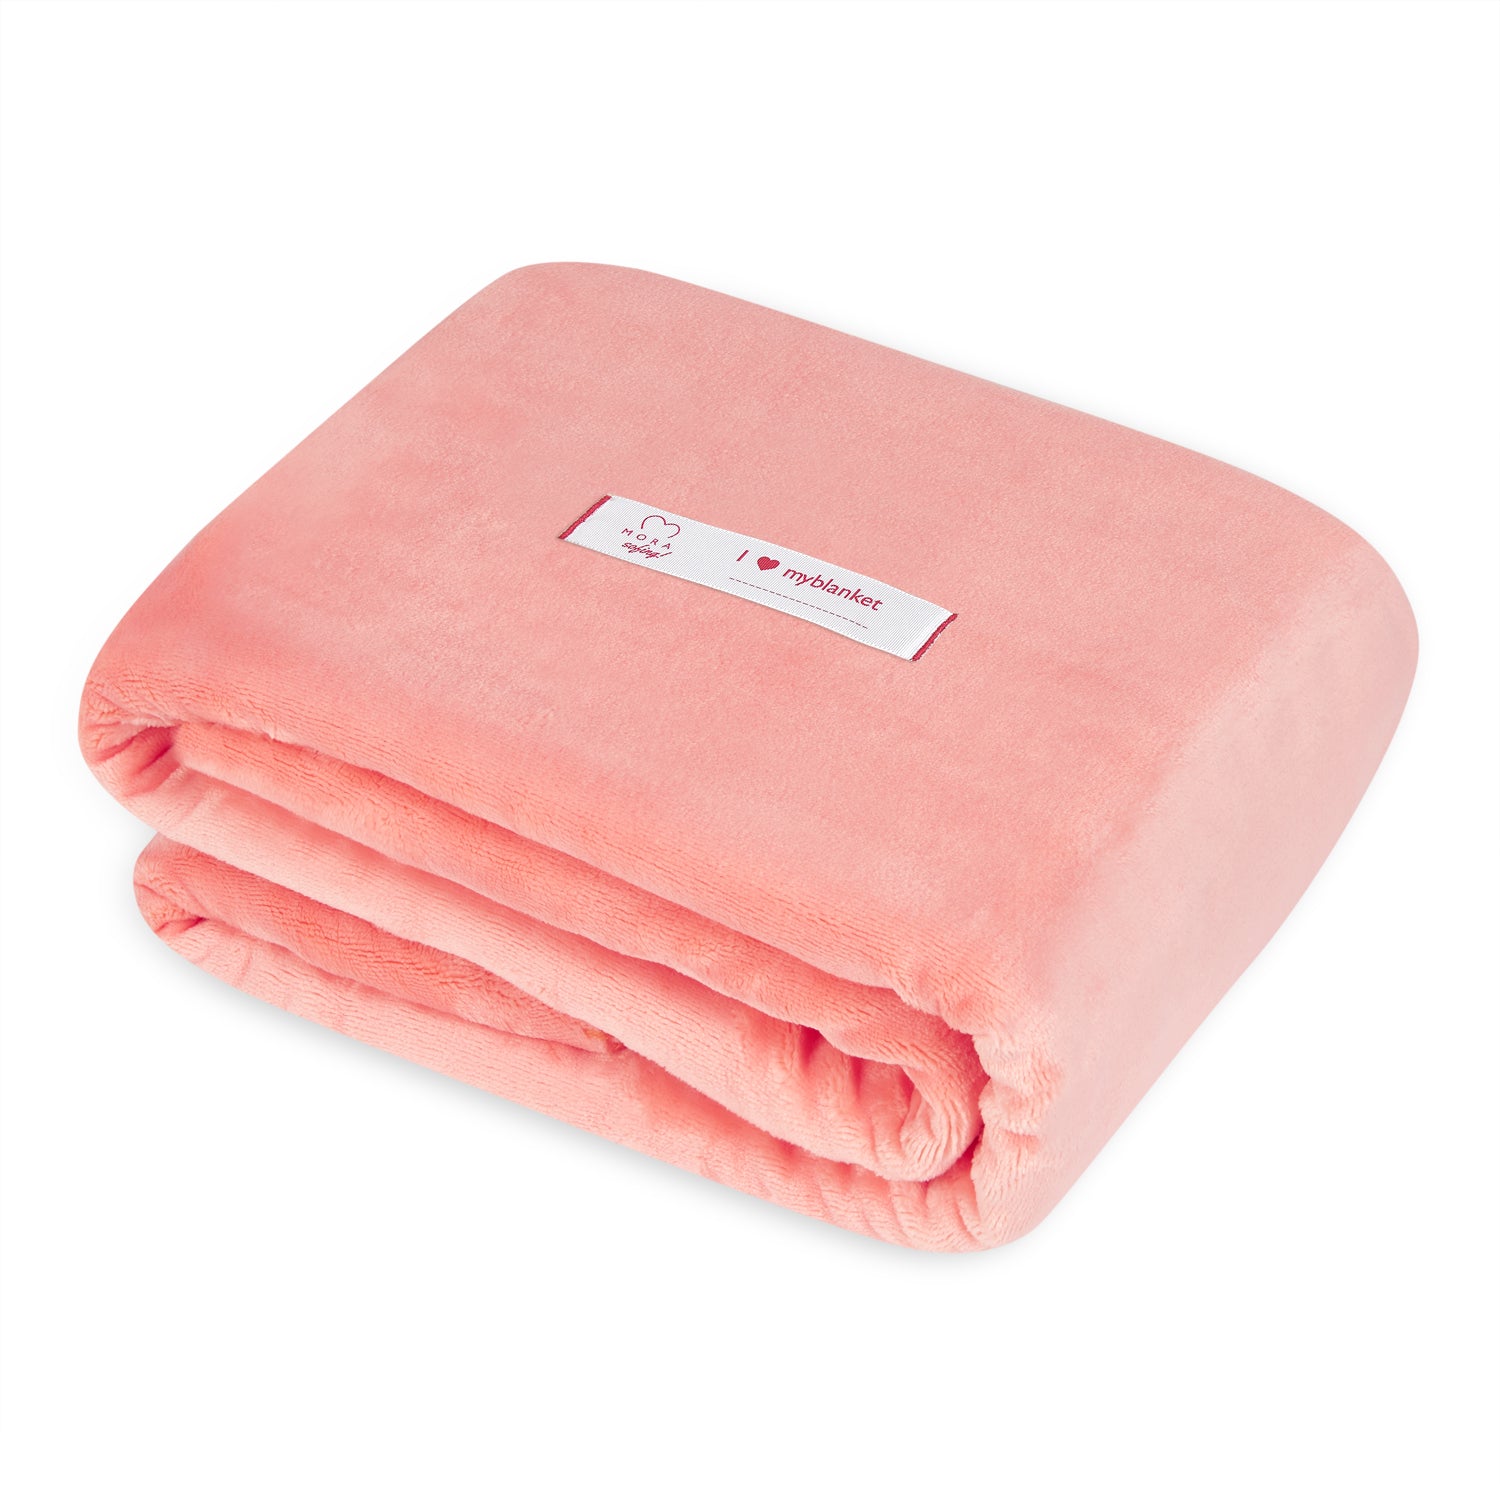 Mora Sofing (Pink Blanket) Throw, Chunky Knit, Cotton, Blankets, Cosy